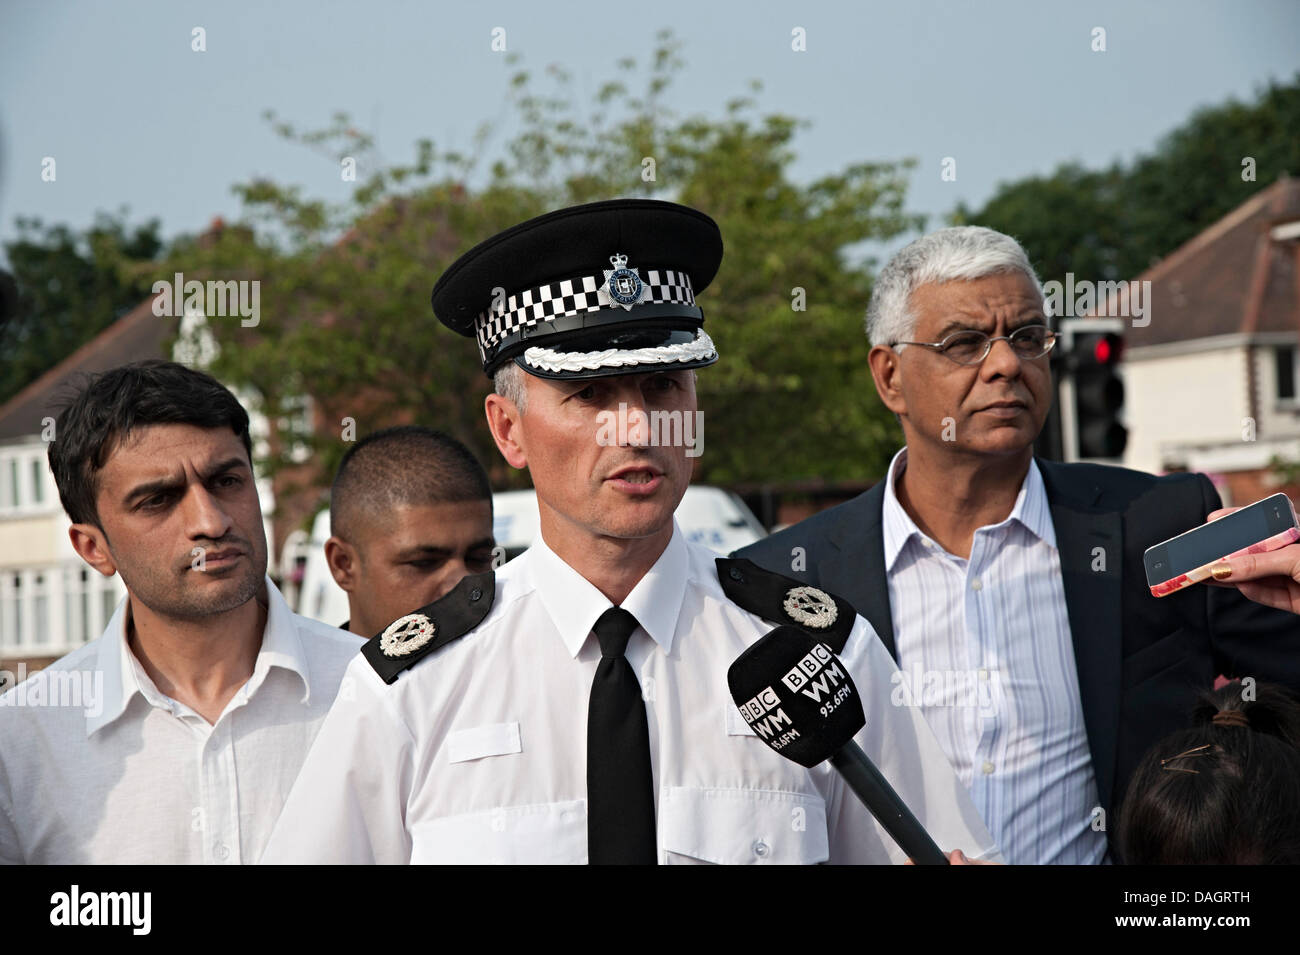 Tipton, West Midlands, UK. 12th July 2013. Mosque nail bomb.gareth cann assistant chief constable from west midlands police spea Stock Photo